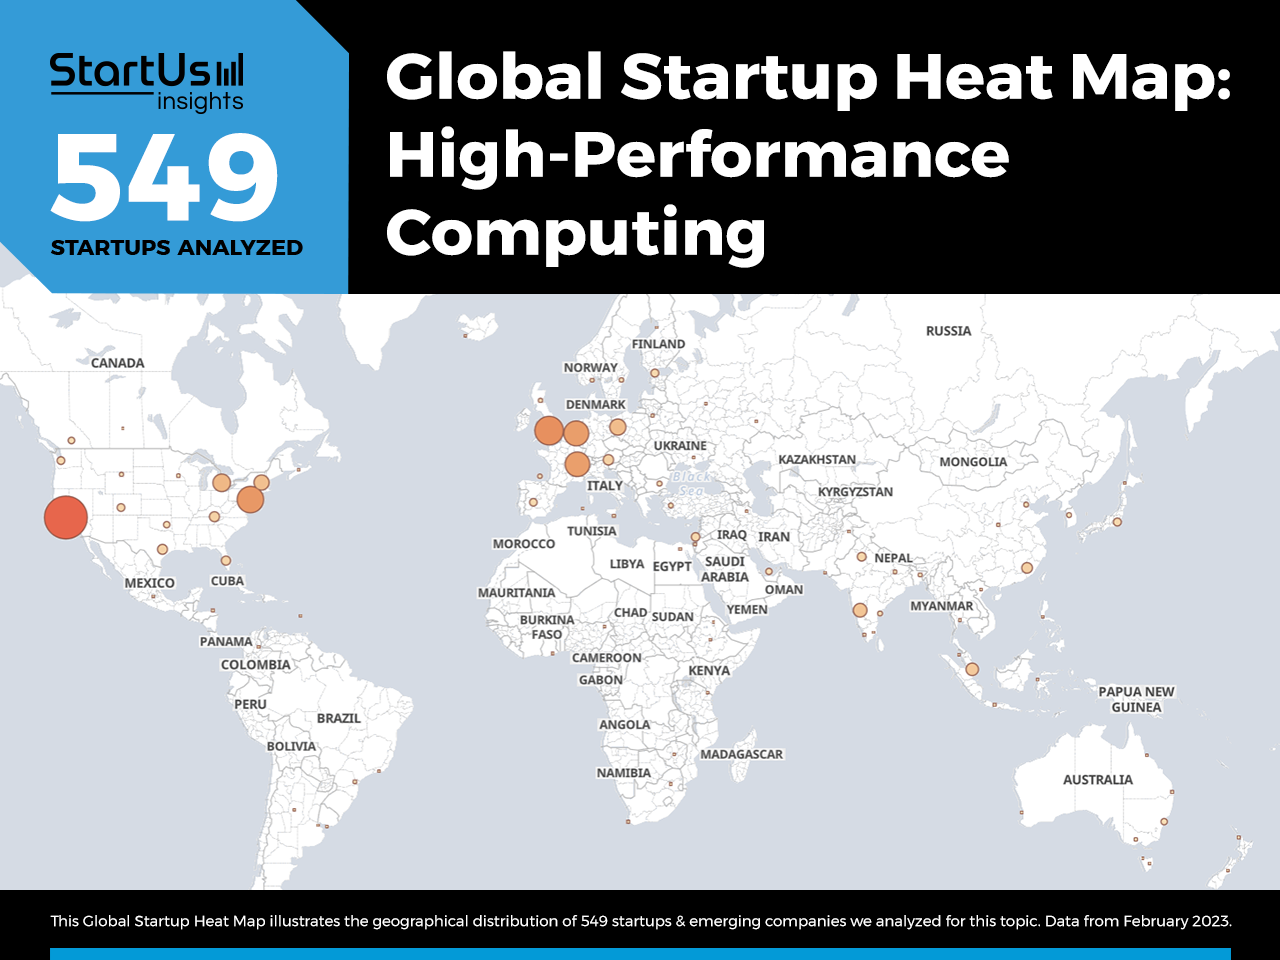 High-Performance-Computing-Trends-TrendResearch-Heat-Map-StartUs-Insights-noresize